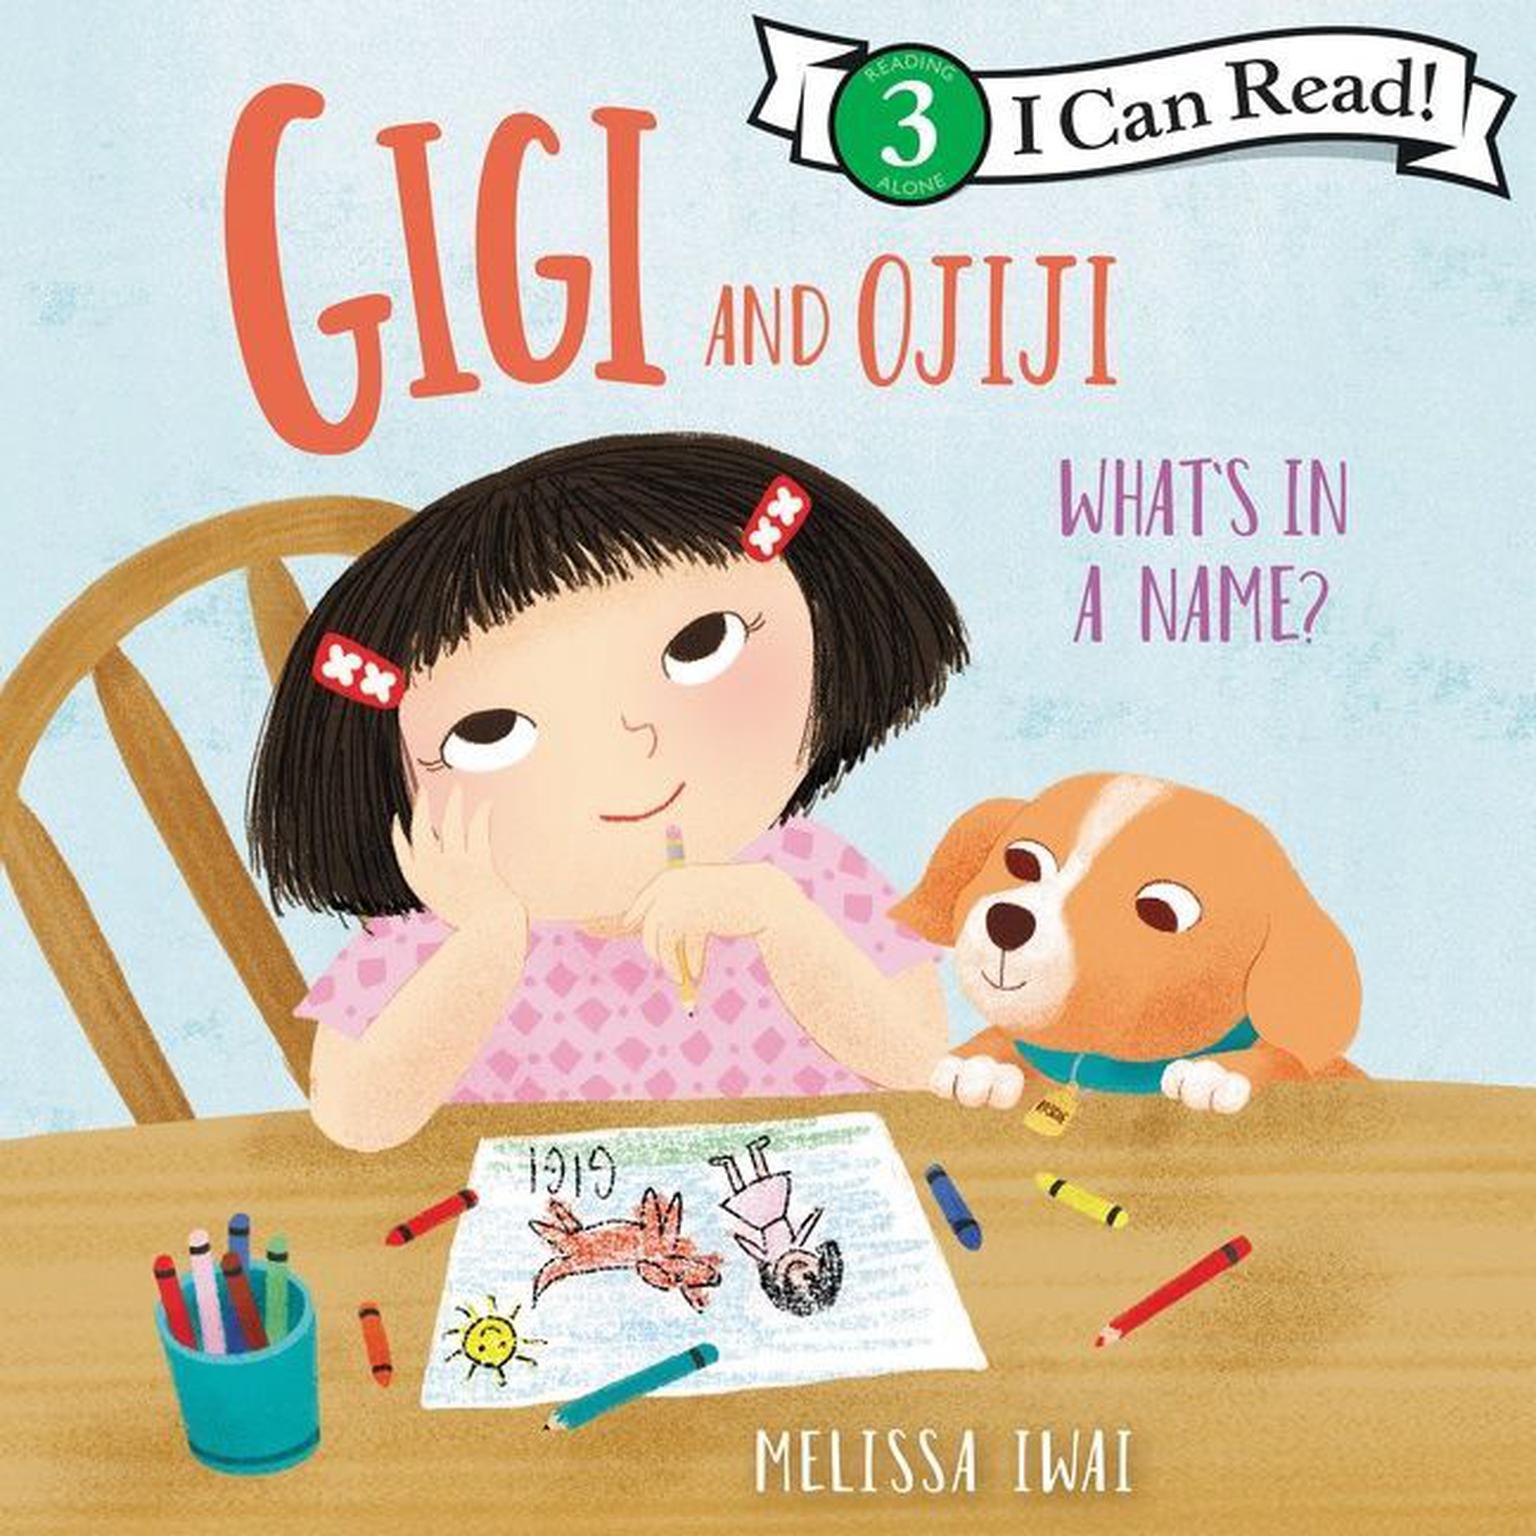 Gigi and Ojiji: What’s in a Name? Audiobook, by Melissa Iwai